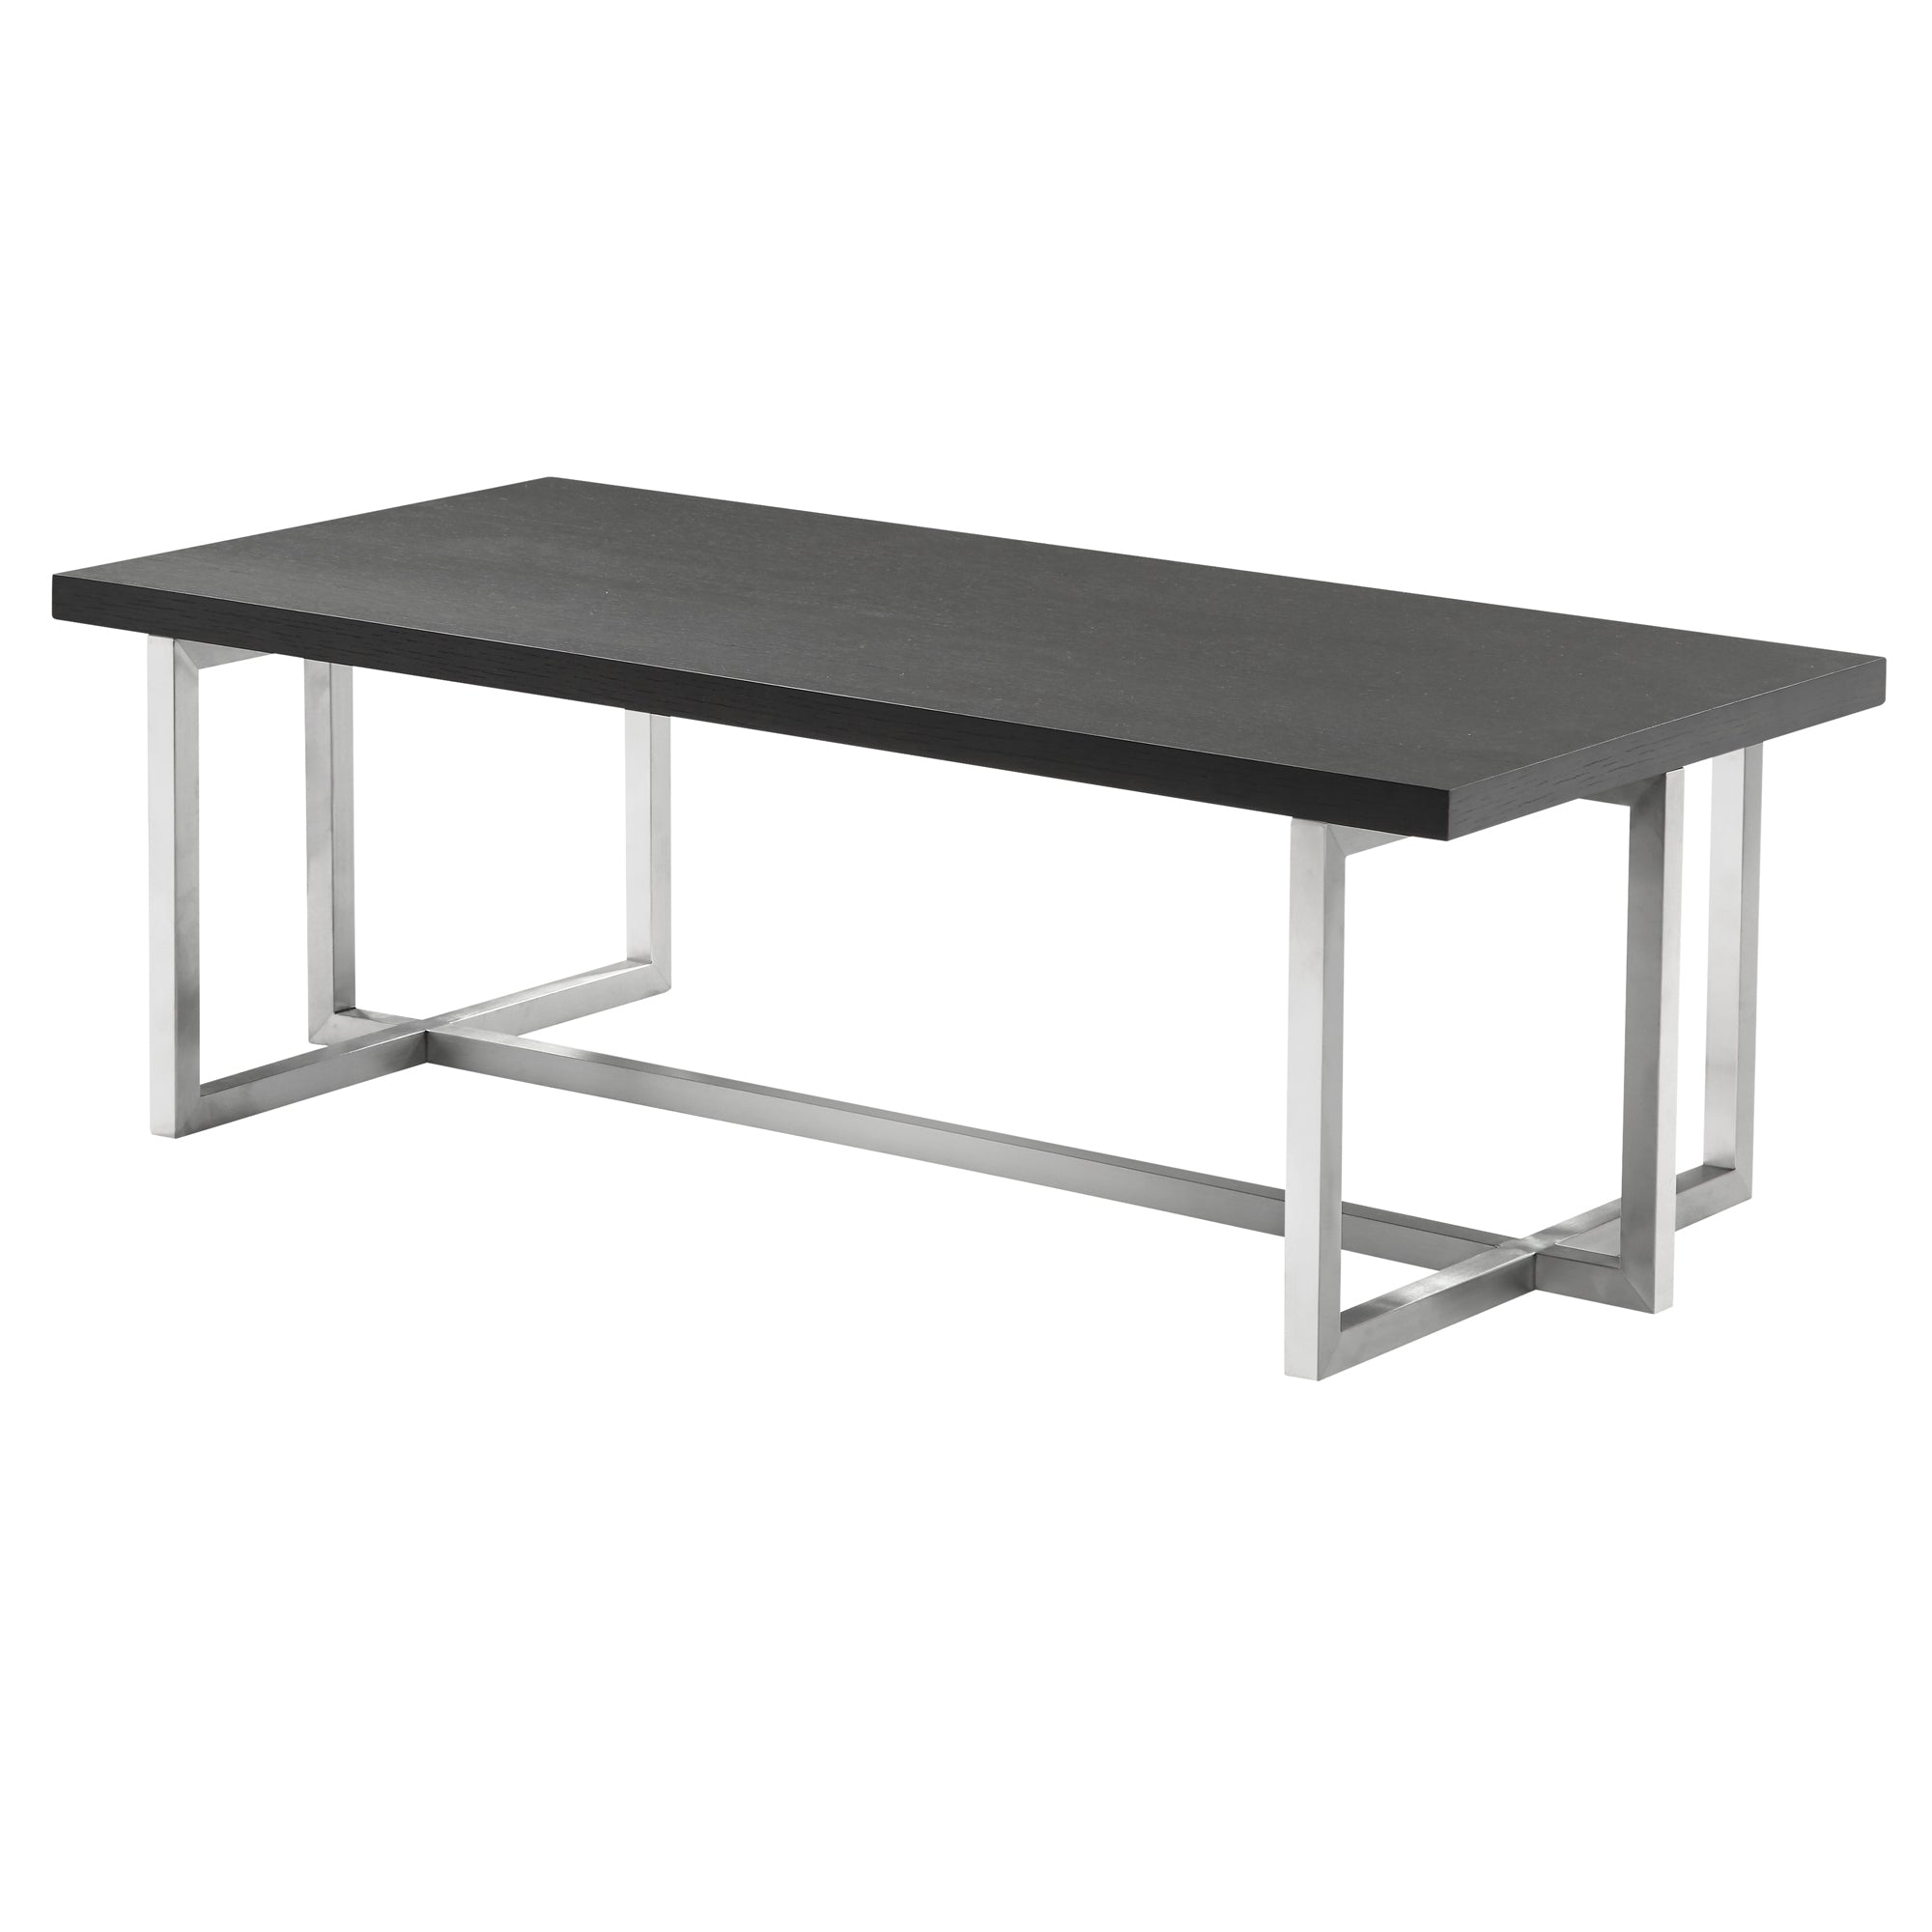 Armen Living Lctpcogrbs Topaz Contemporary Rectangular Coffee Table In Brushed Stainless Steel With Grey Wood Top